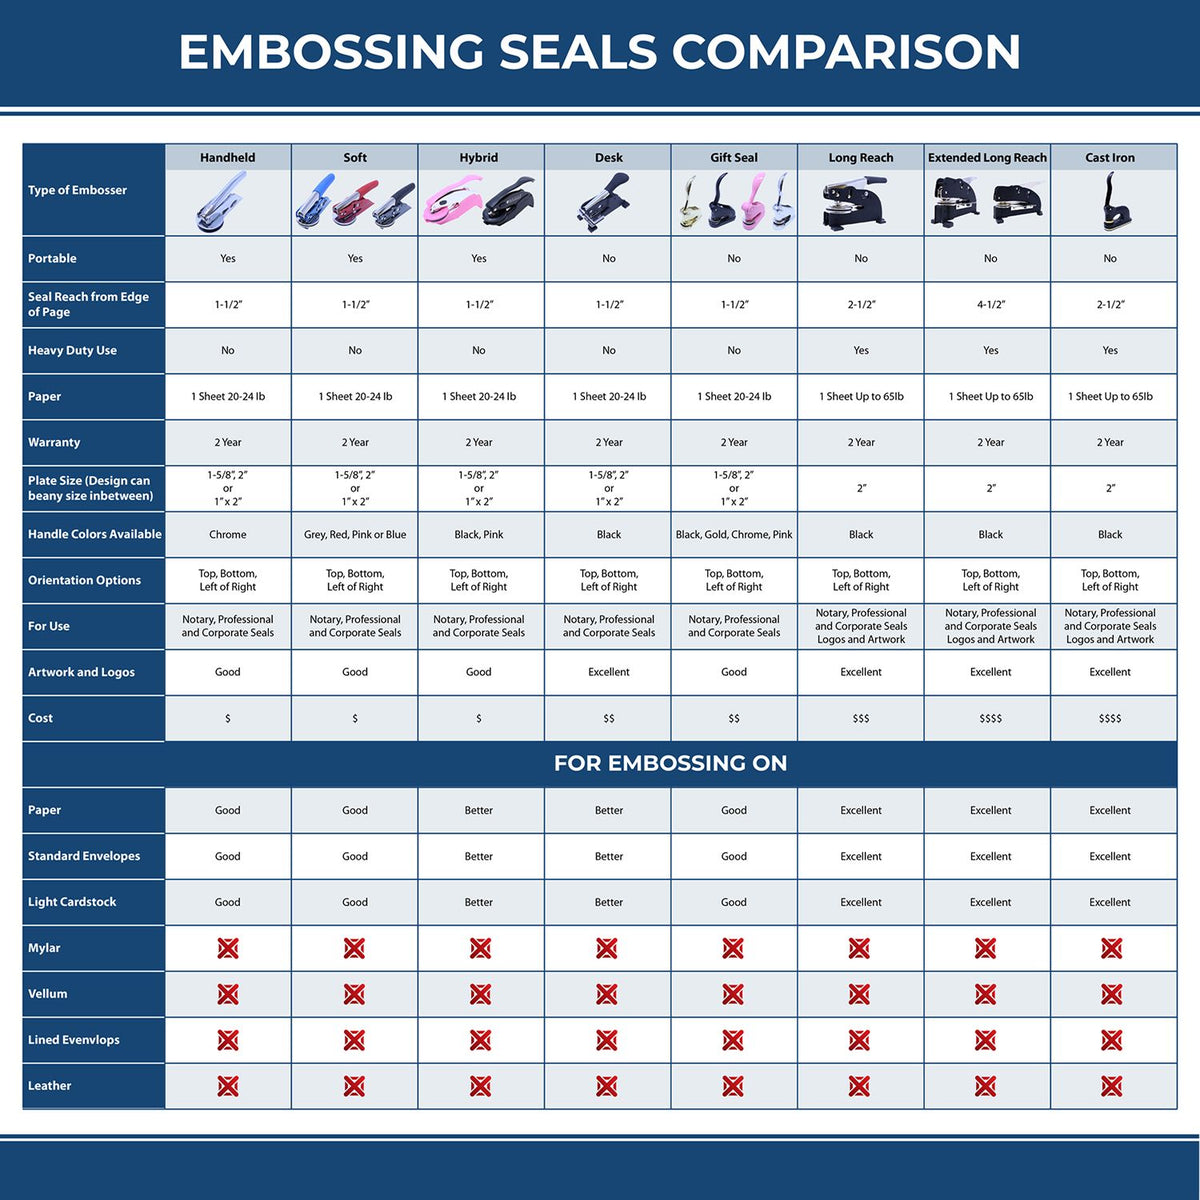 A comparison chart for the different types of mount models available for the Heavy Duty Cast Iron Virginia Architect Embosser.